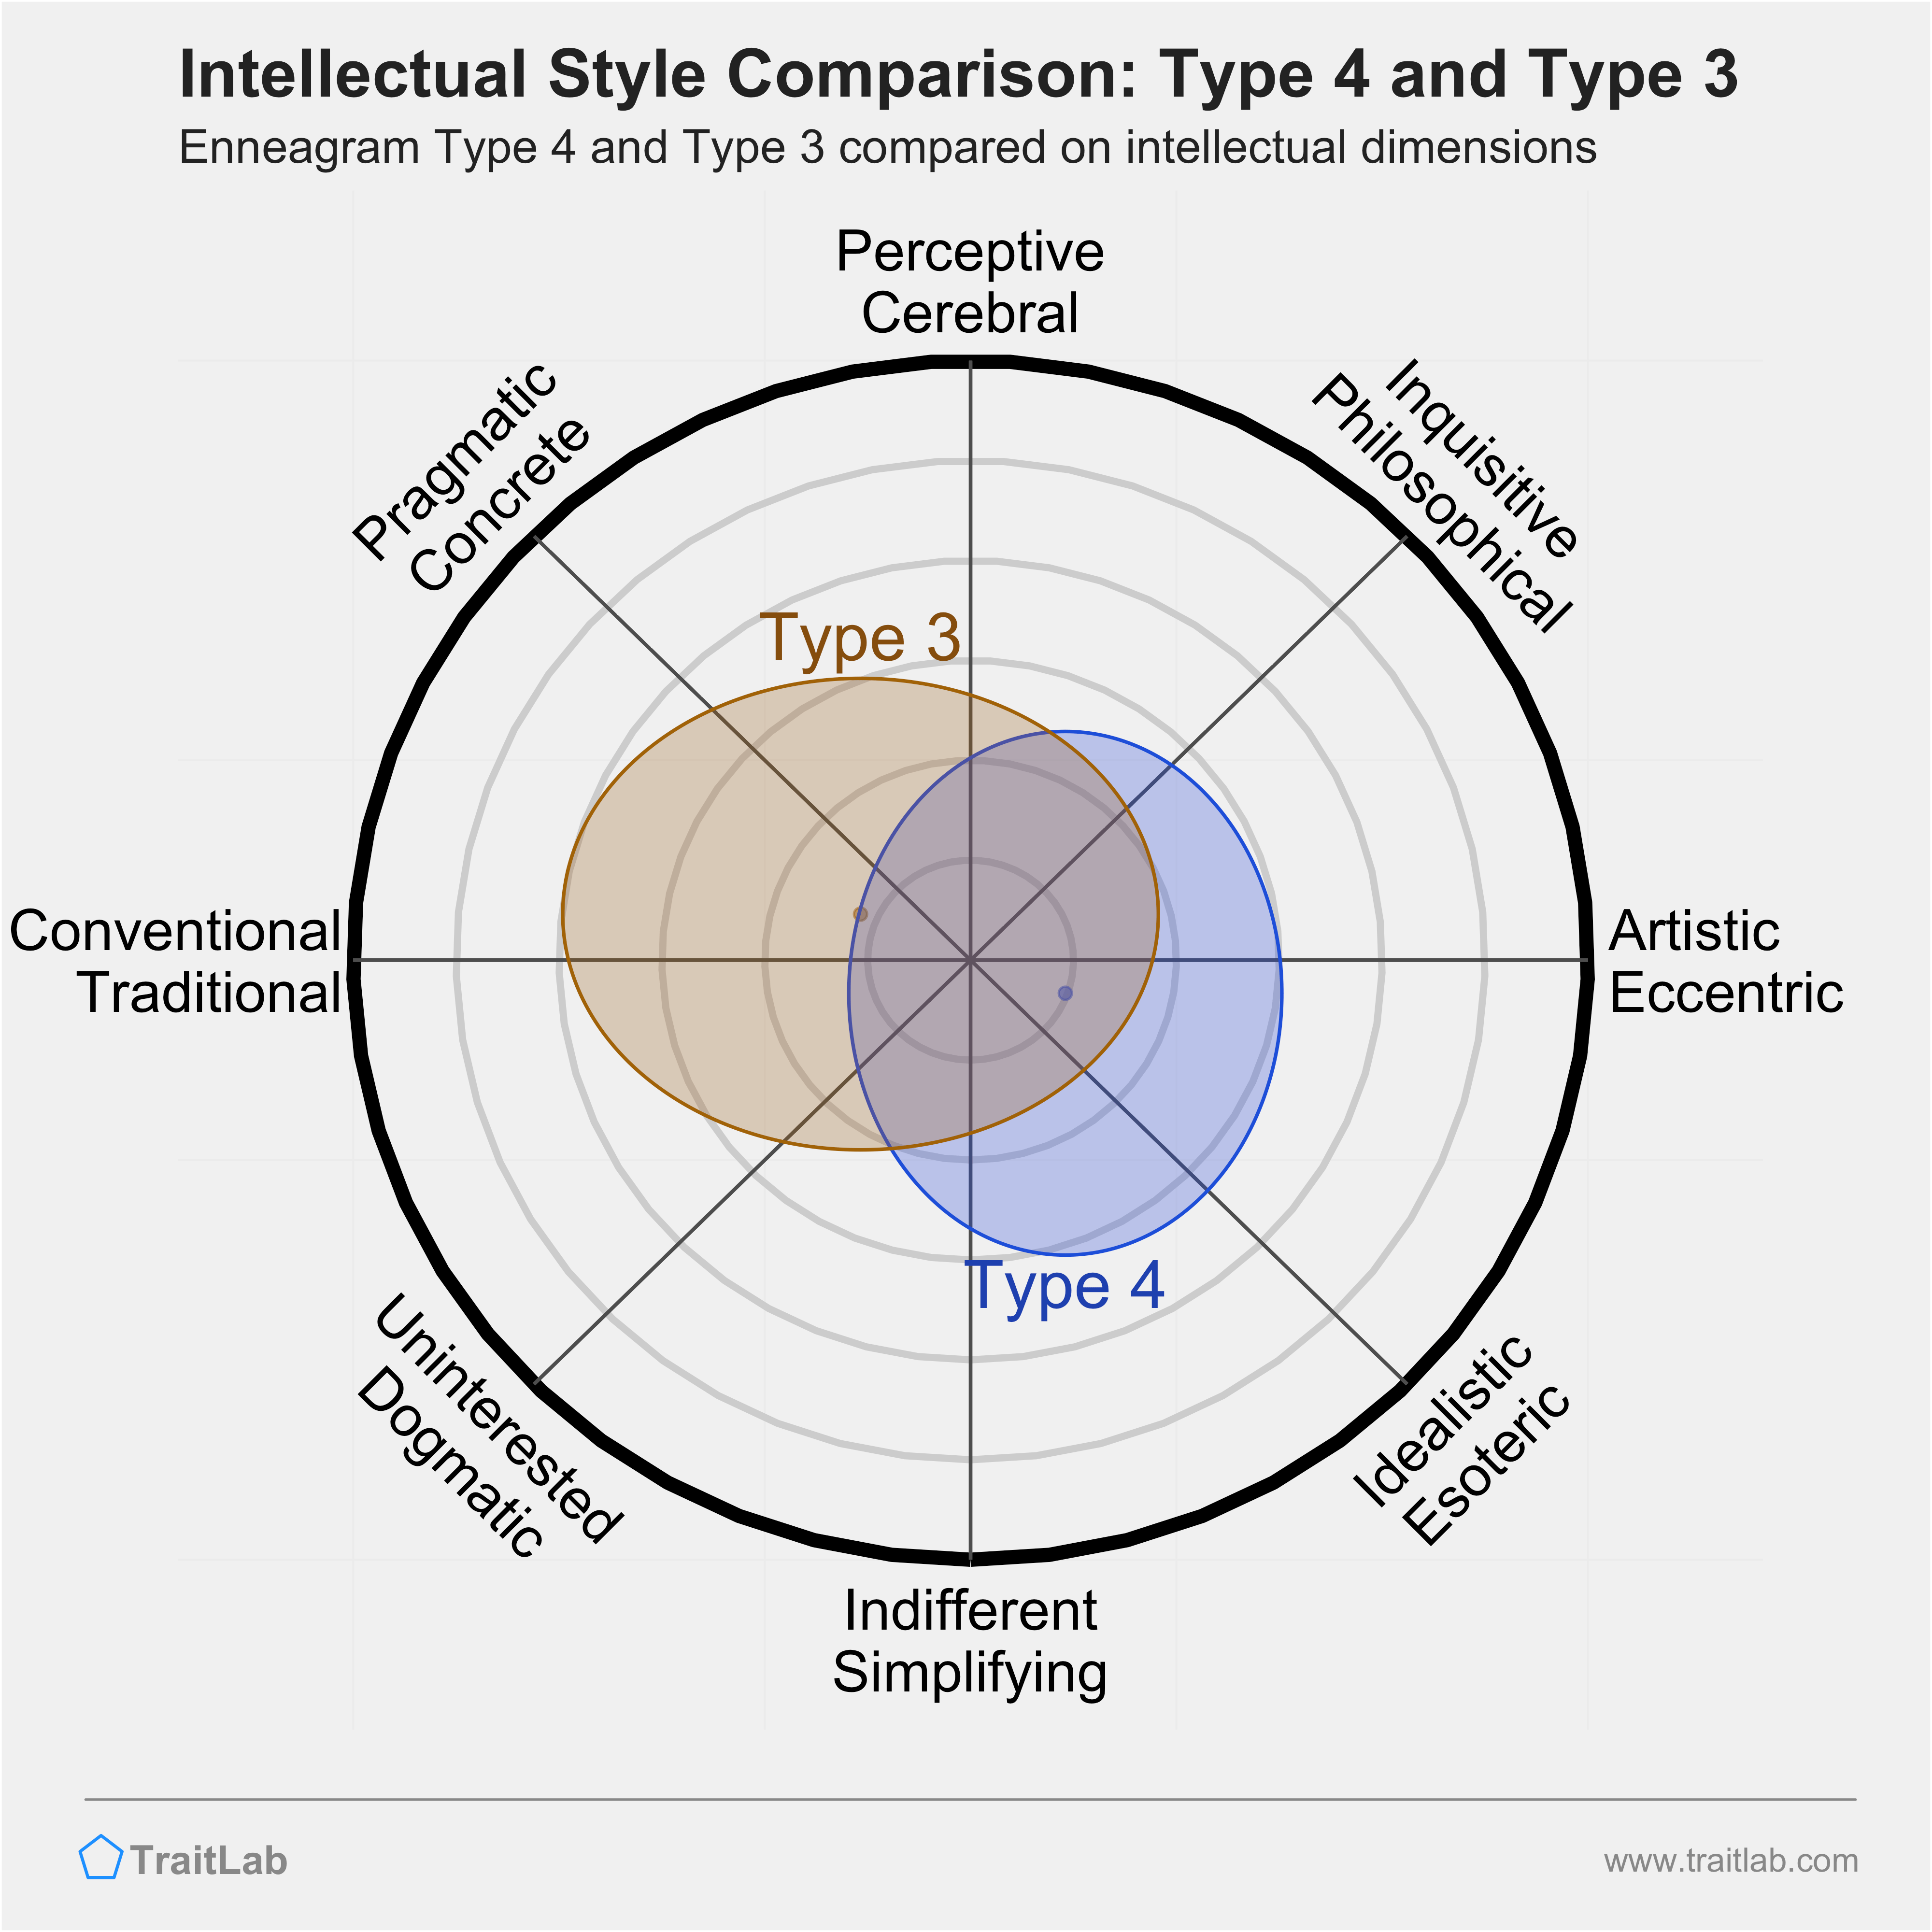 Type 4 and Type 3 comparison across intellectual dimensions